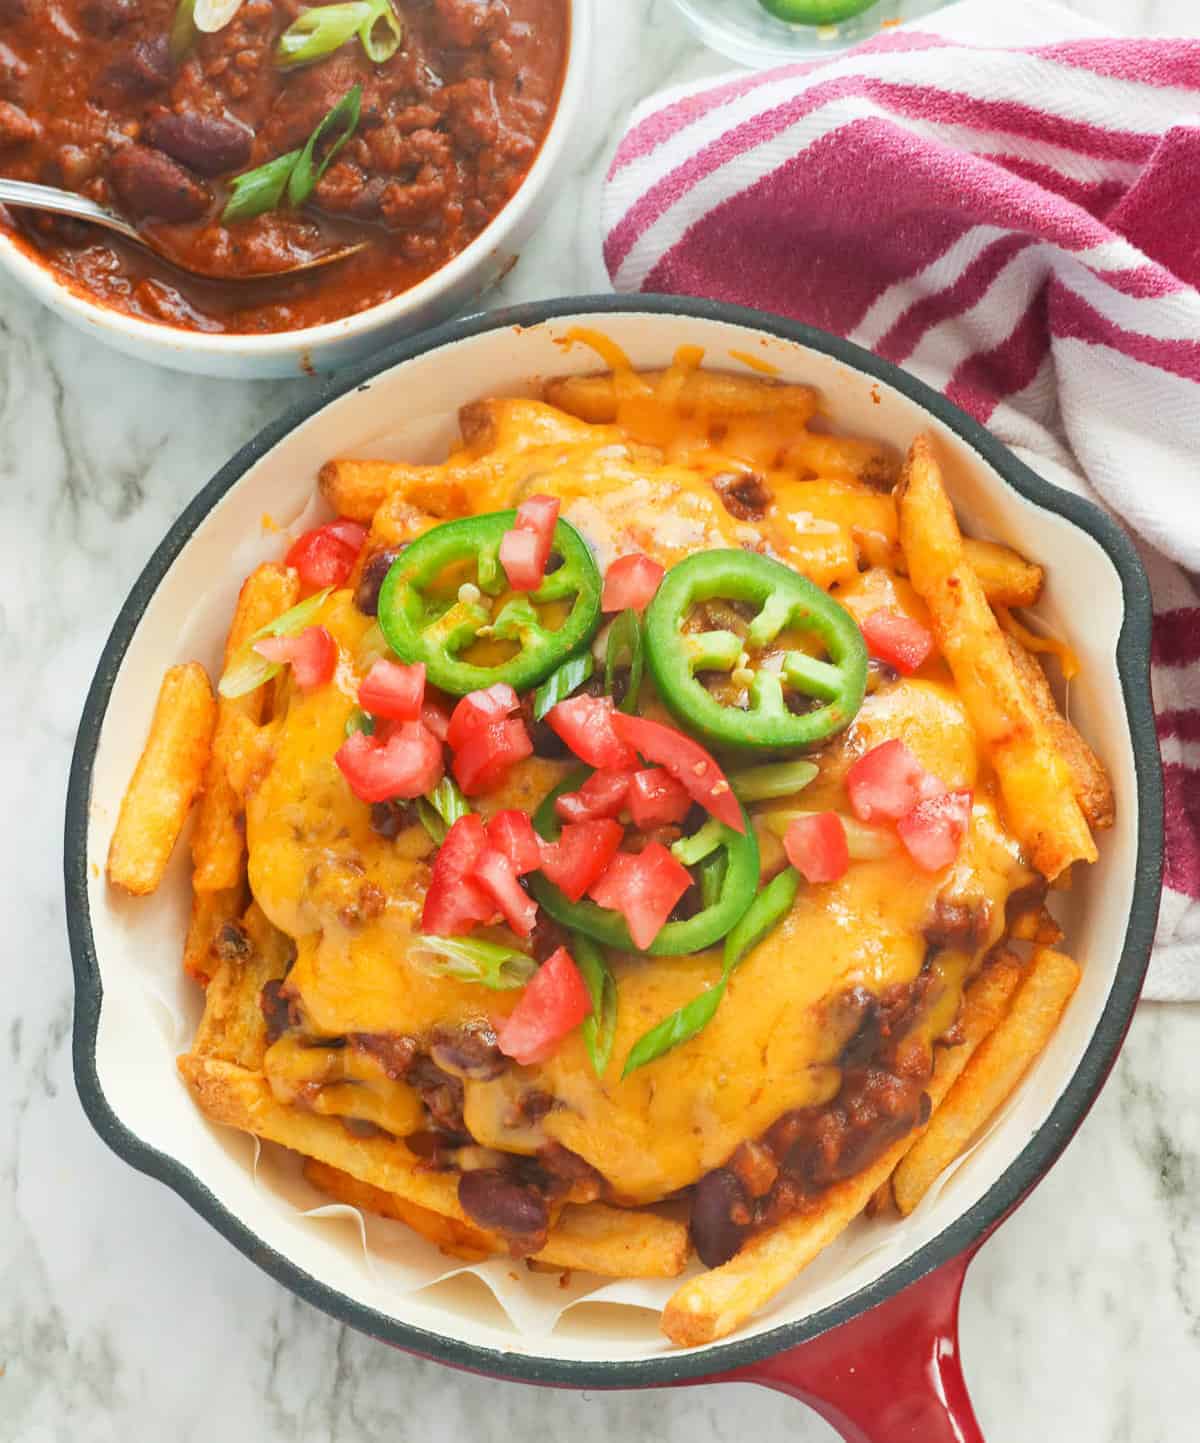 Chili cheese fries to make chicken wings even more family-friendly